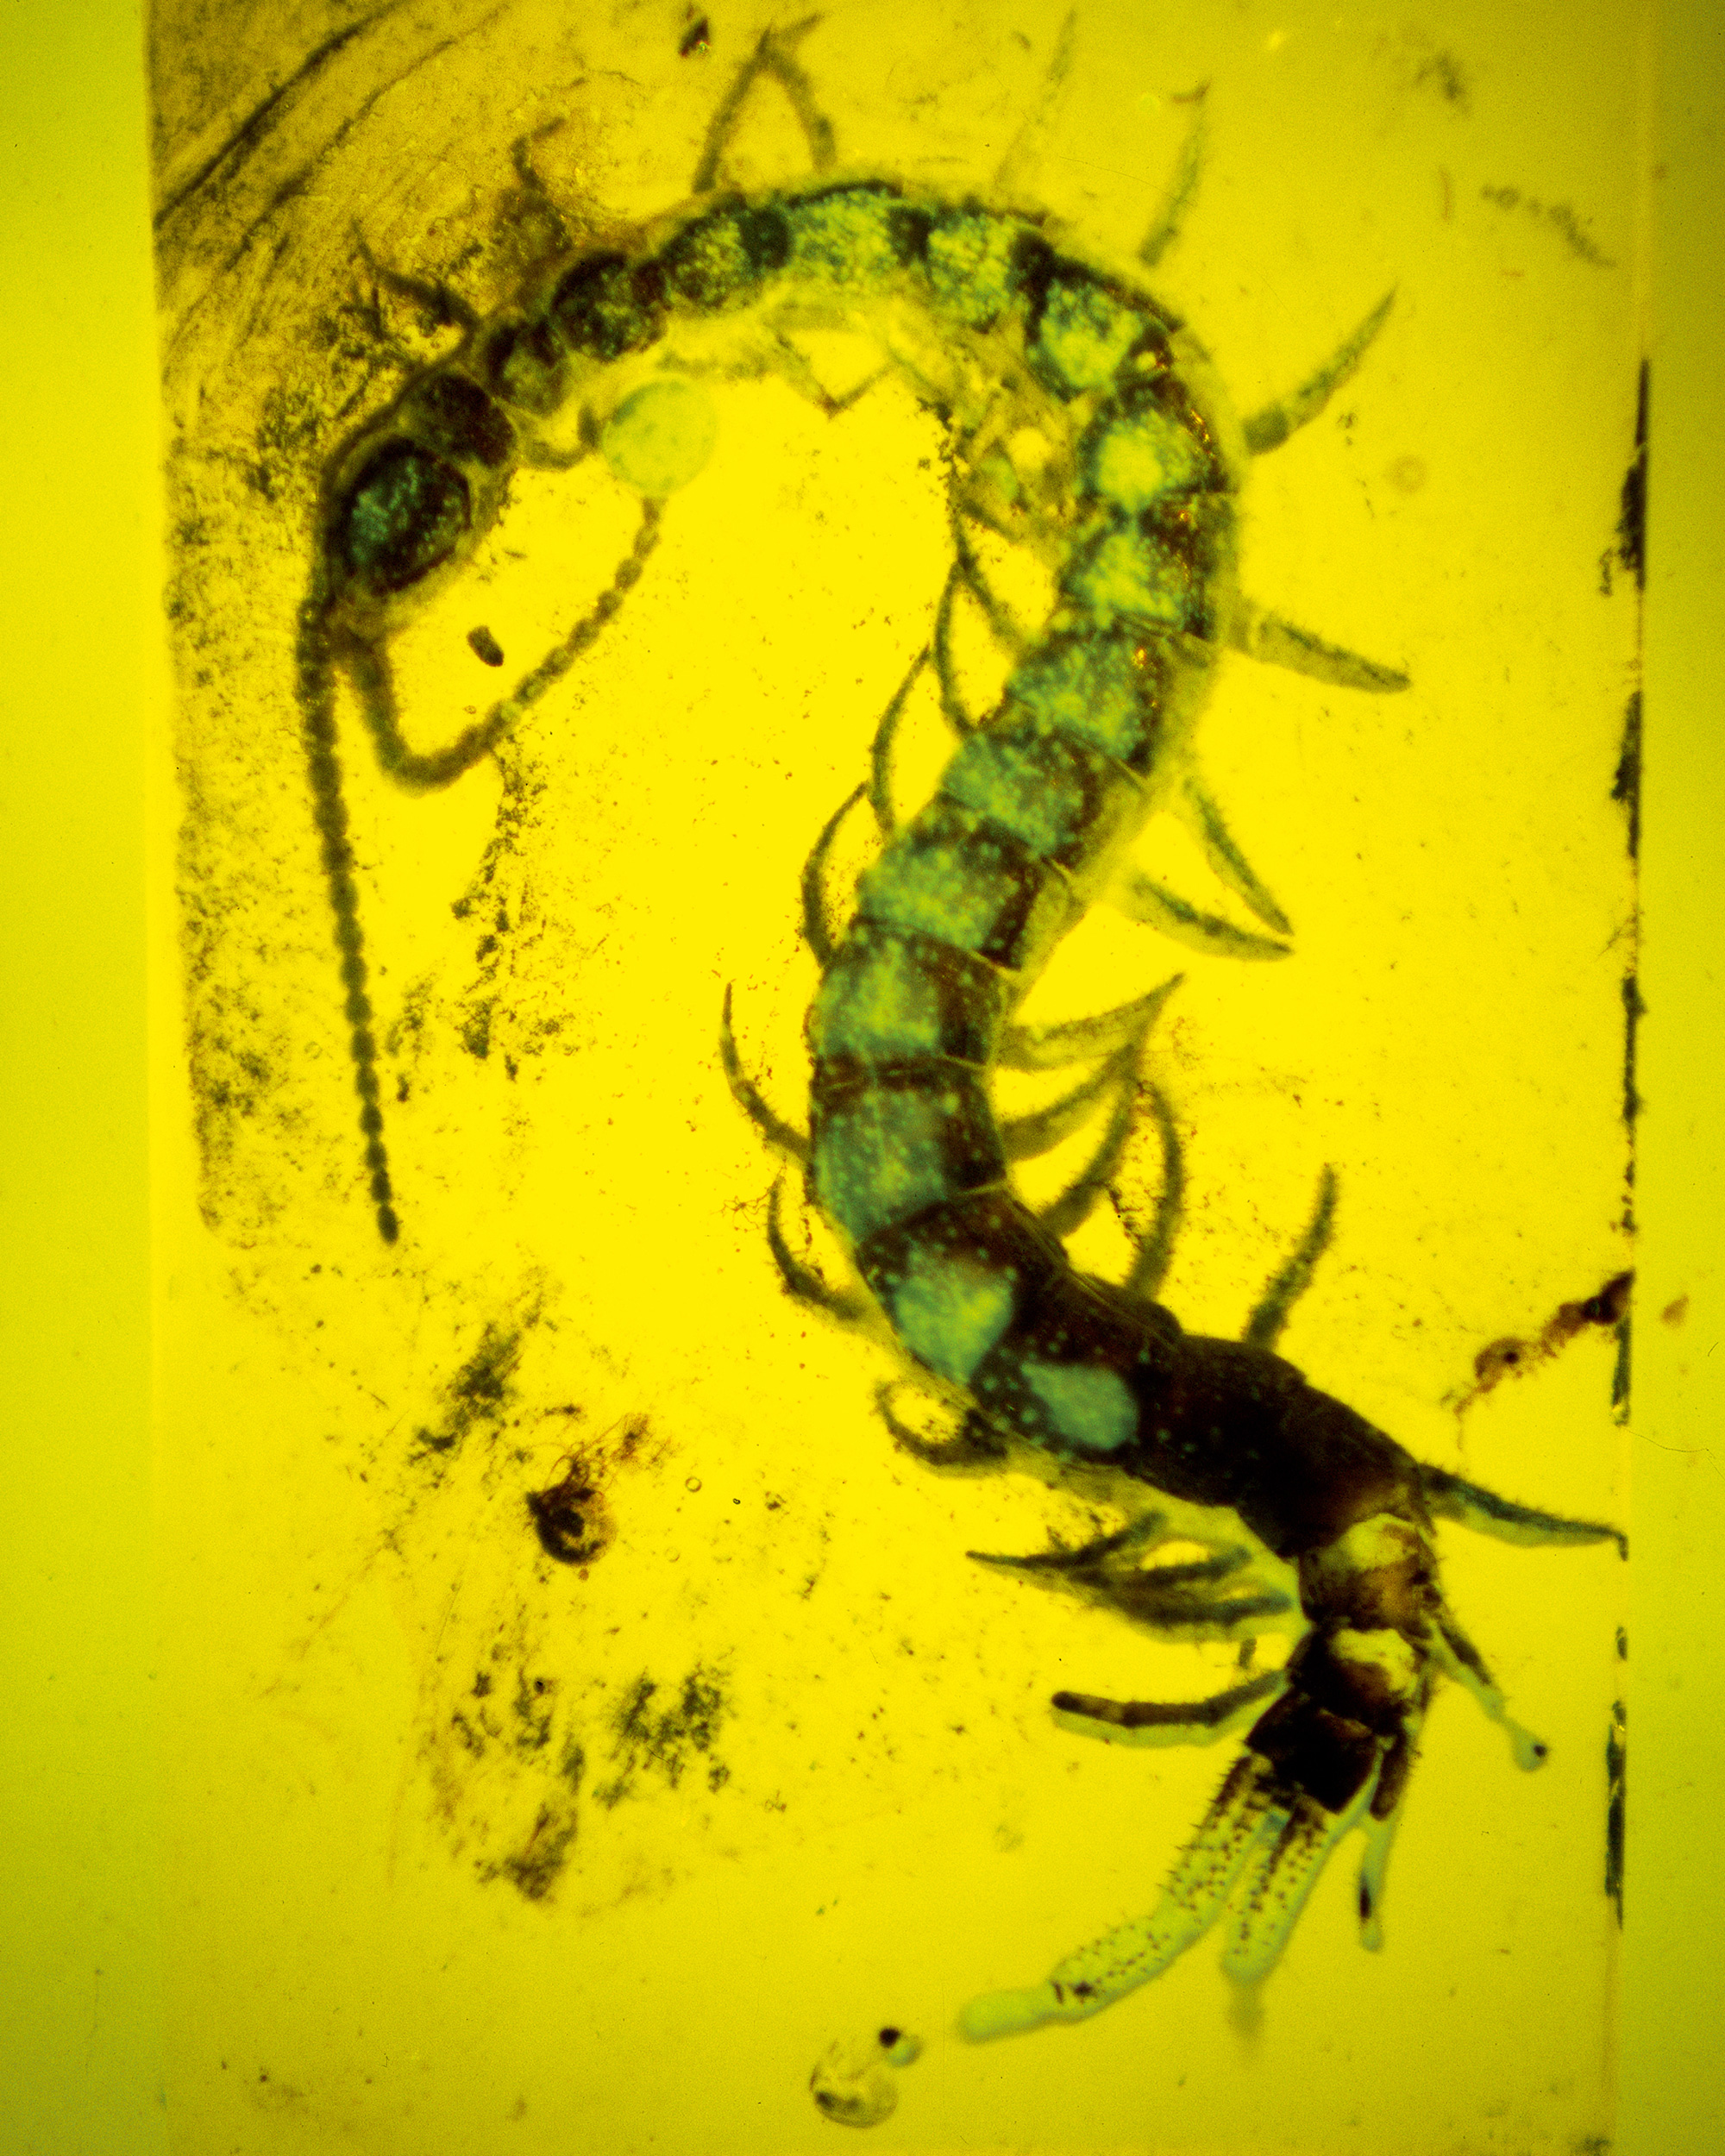 A photograph of a centipede preserved in Baltic amber dating from the Upper Eocene subepoch.